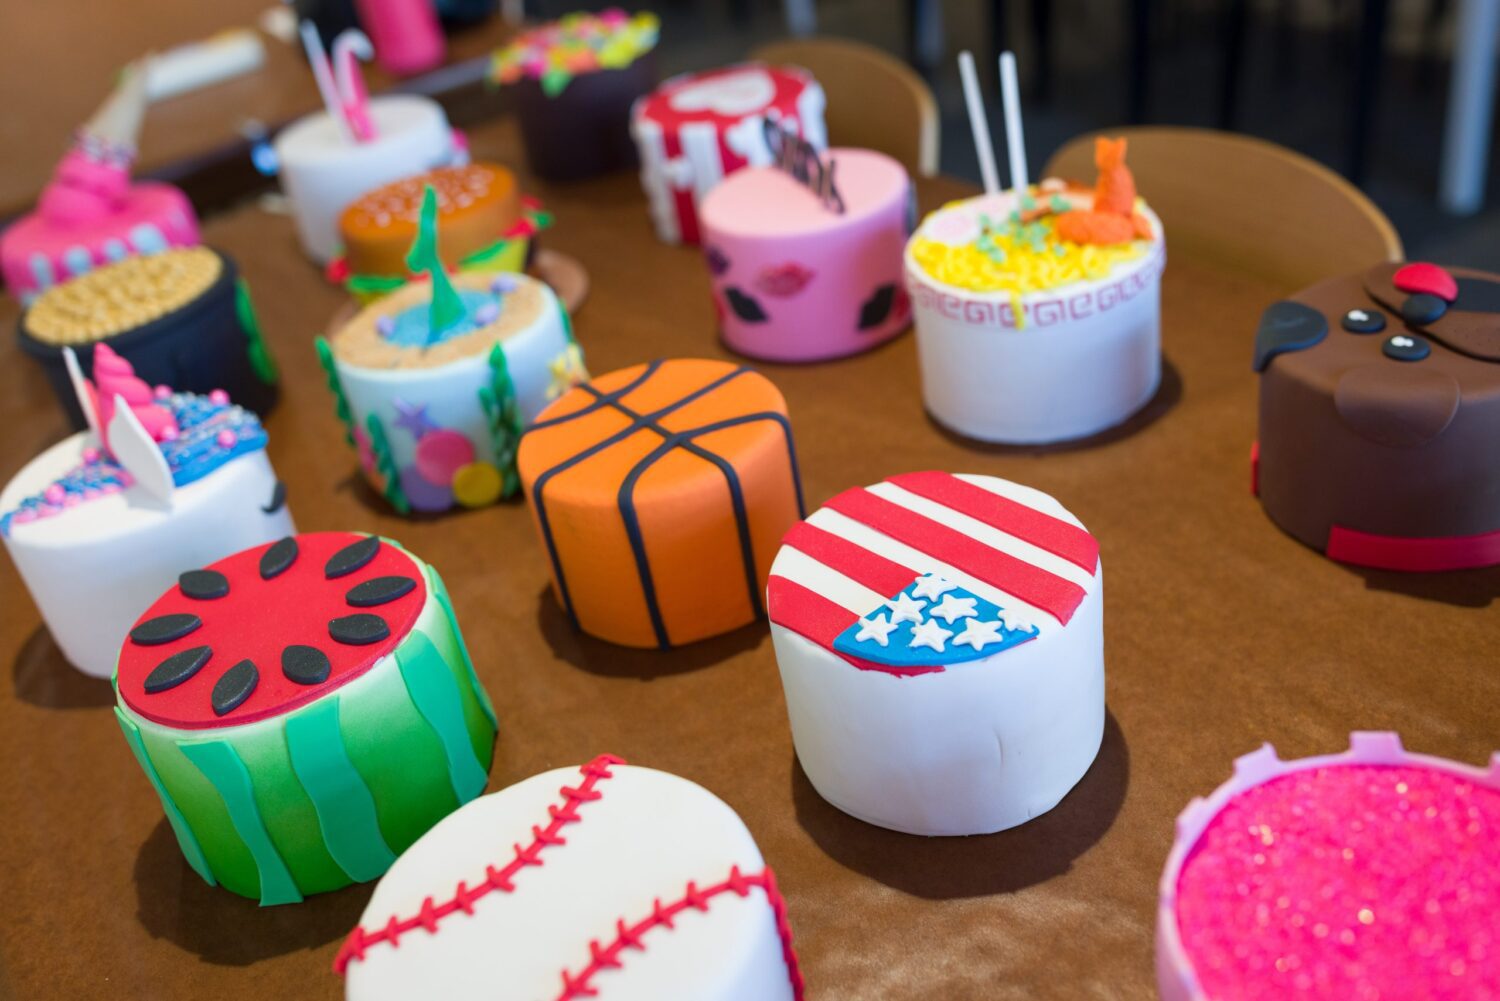 Cutely decorated cakes